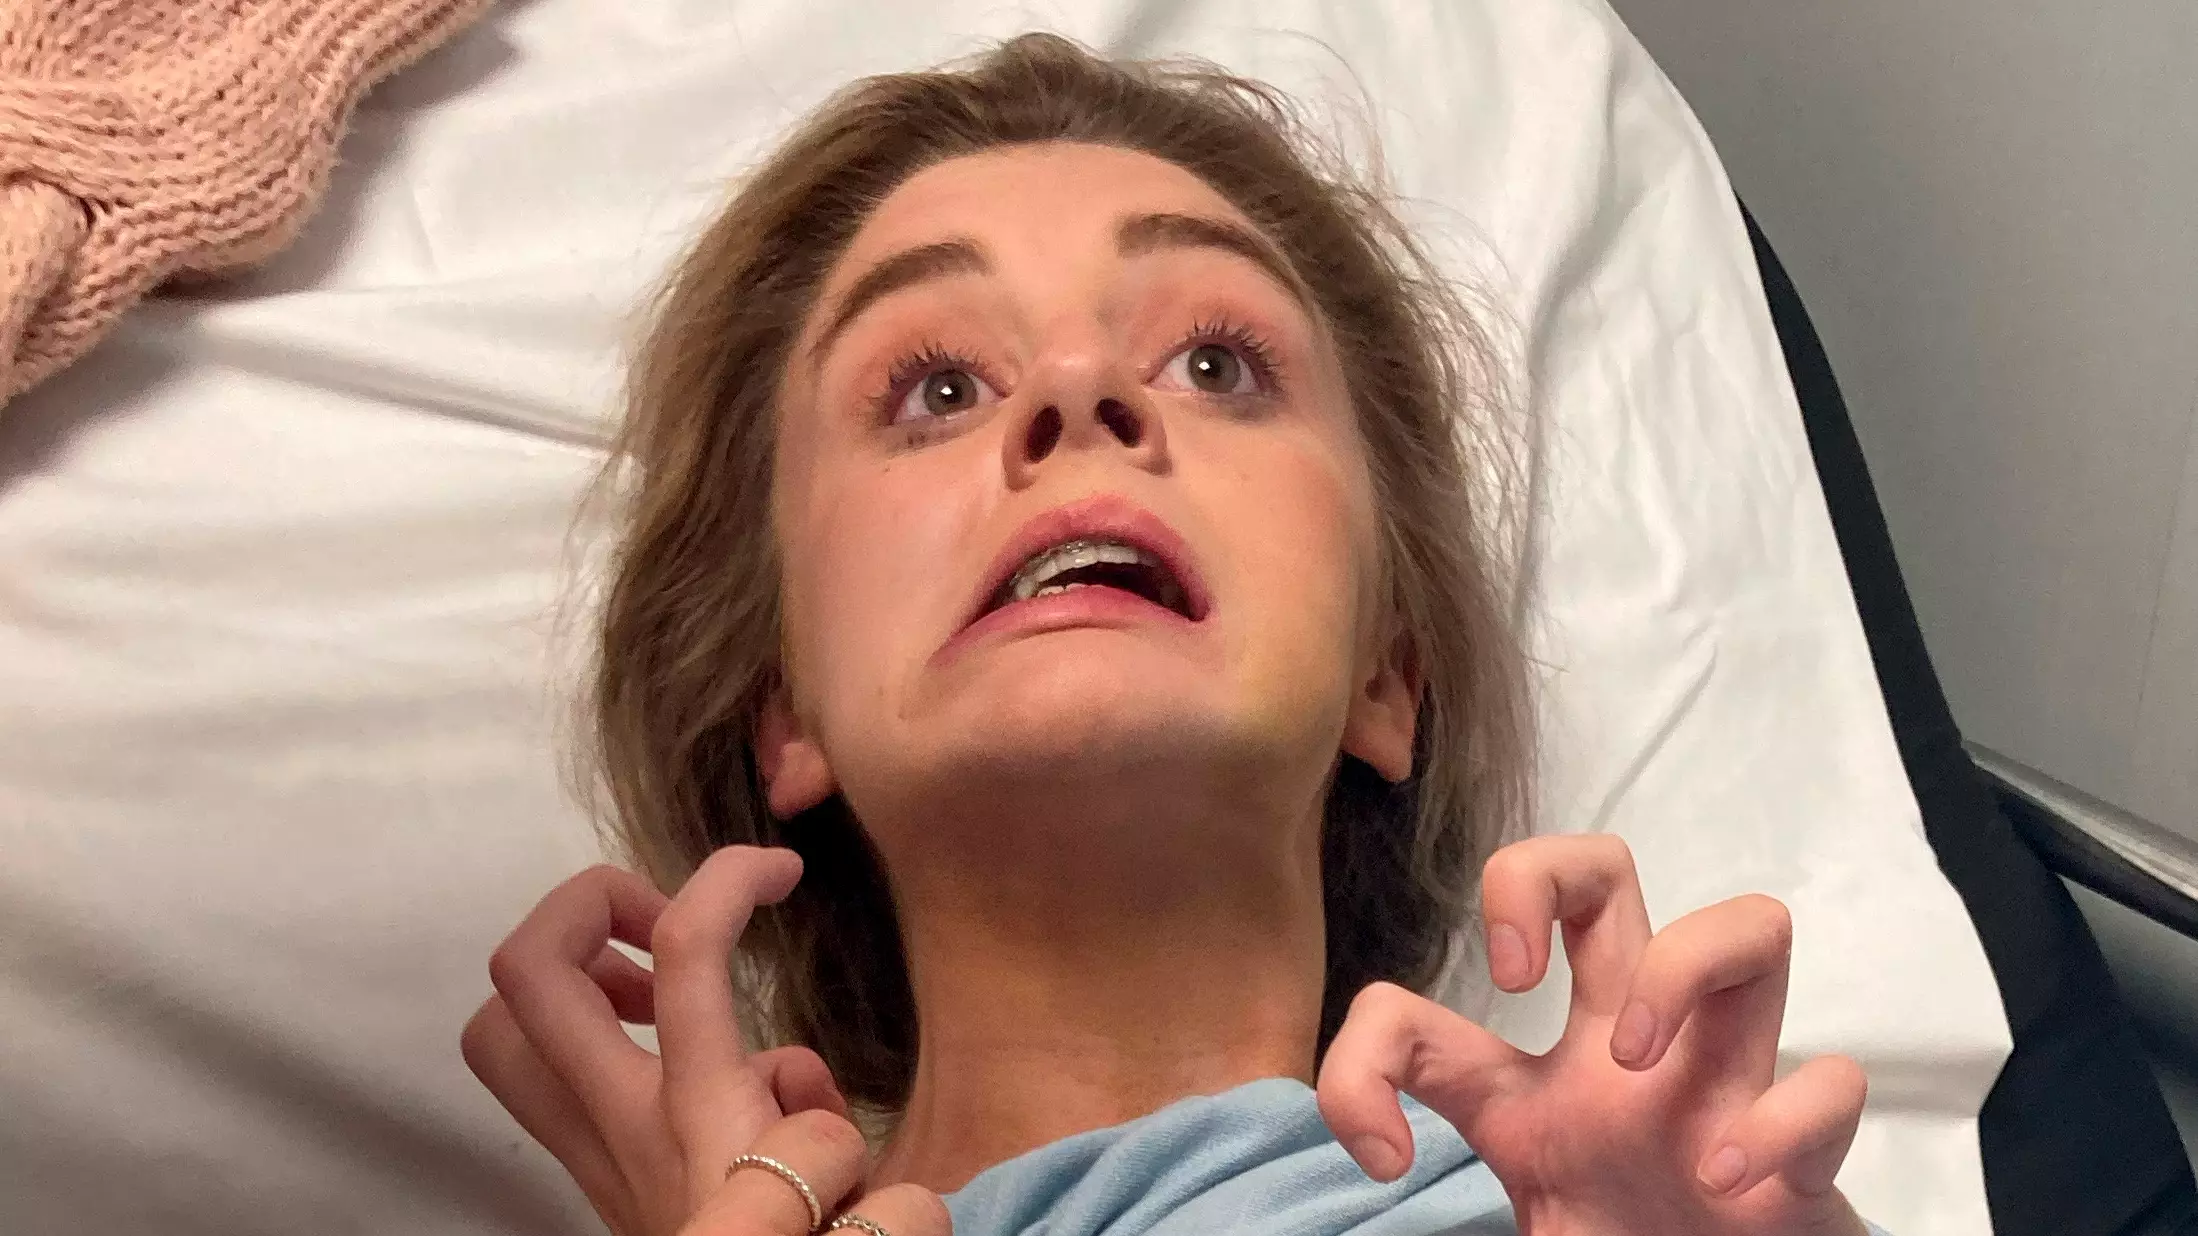 Teen Who Was Left ‘Frozen’ After Being Spiked Has Said She’s Scared To Go Back Out 